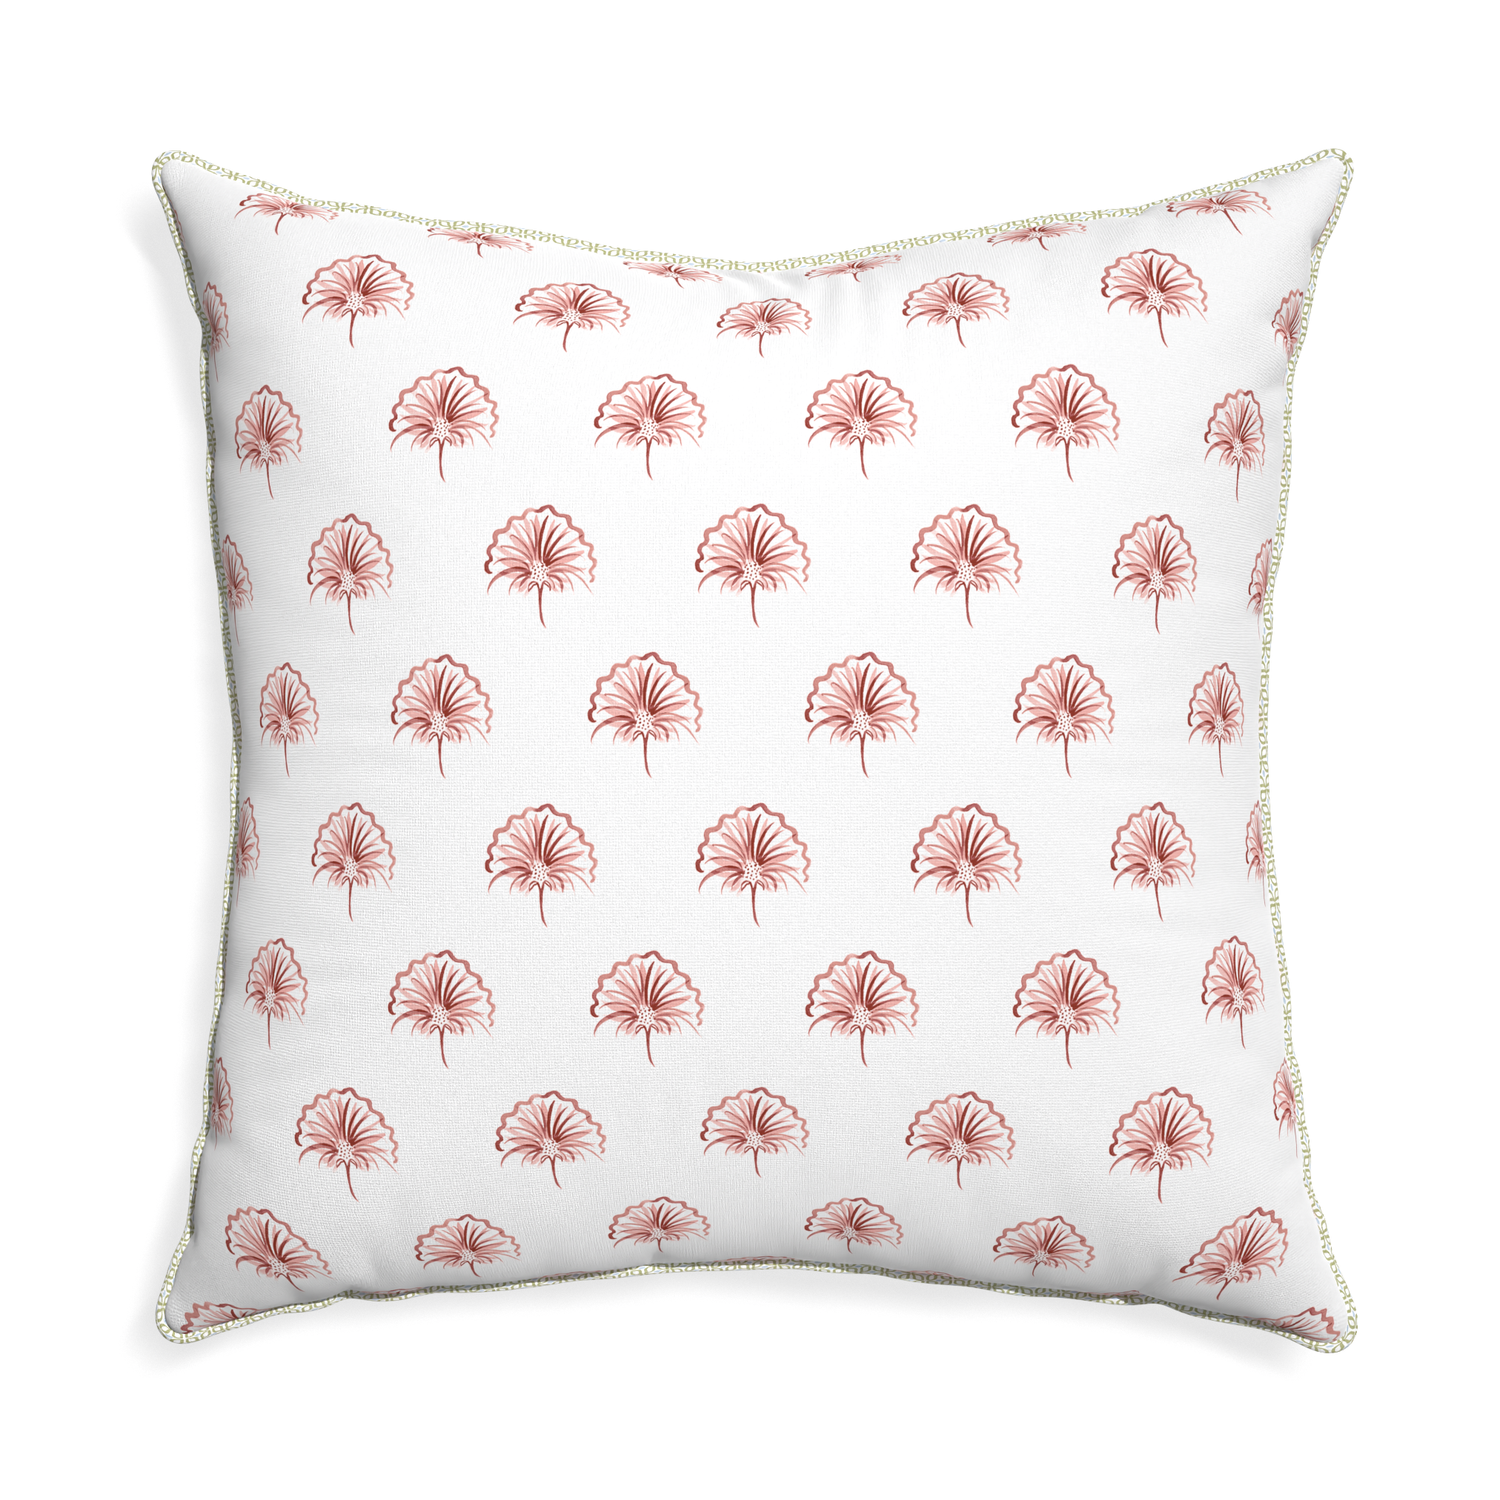 Euro-sham penelope rose custom pillow with l piping on white background